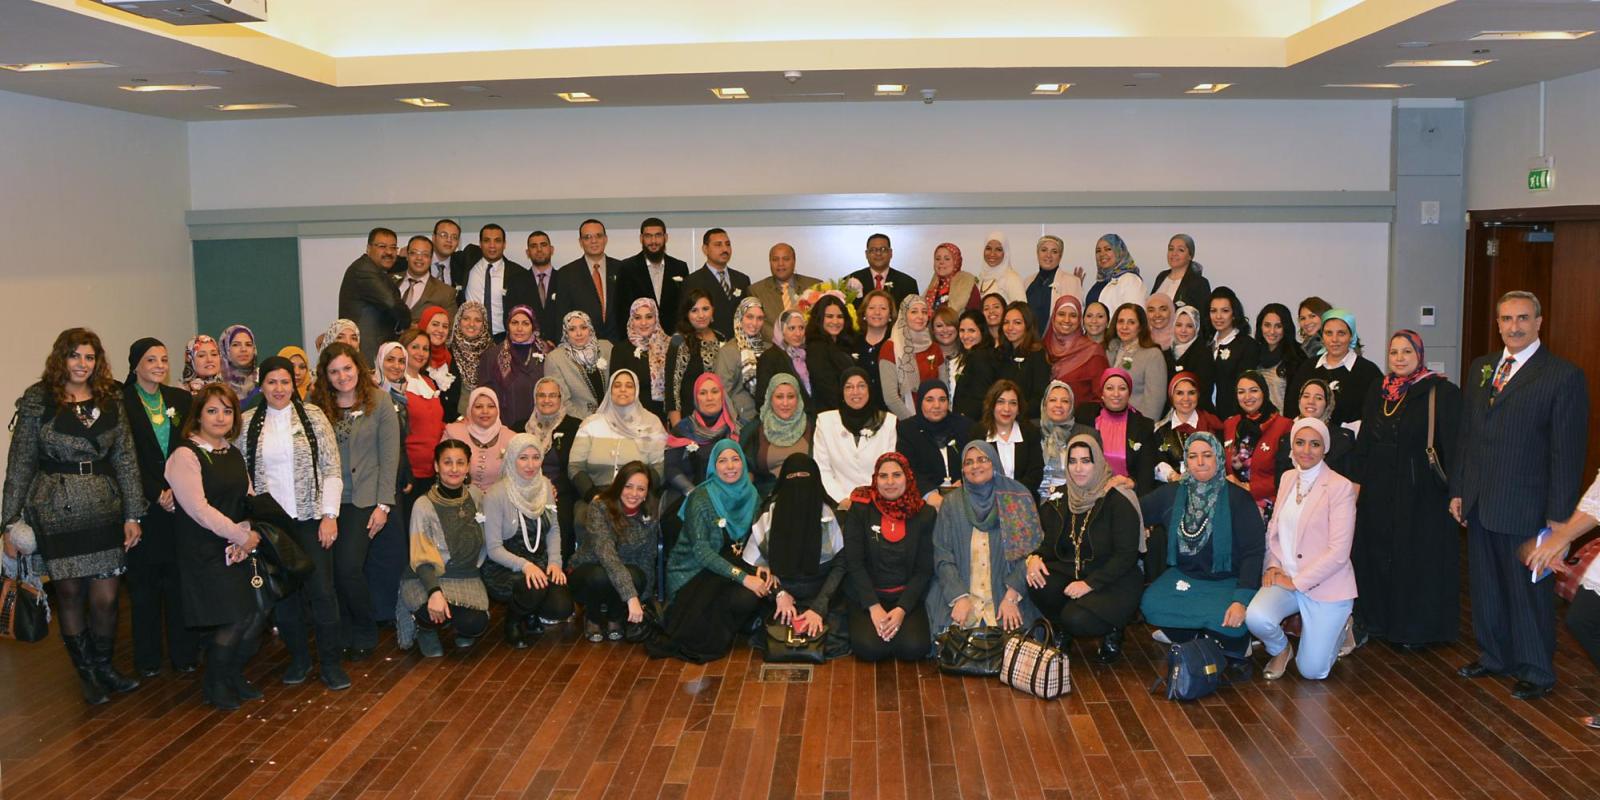 Graduates of the Professional Educator Diploma Fellowship at AUC’s Graduate School of Education are trained to become facilitators of learning